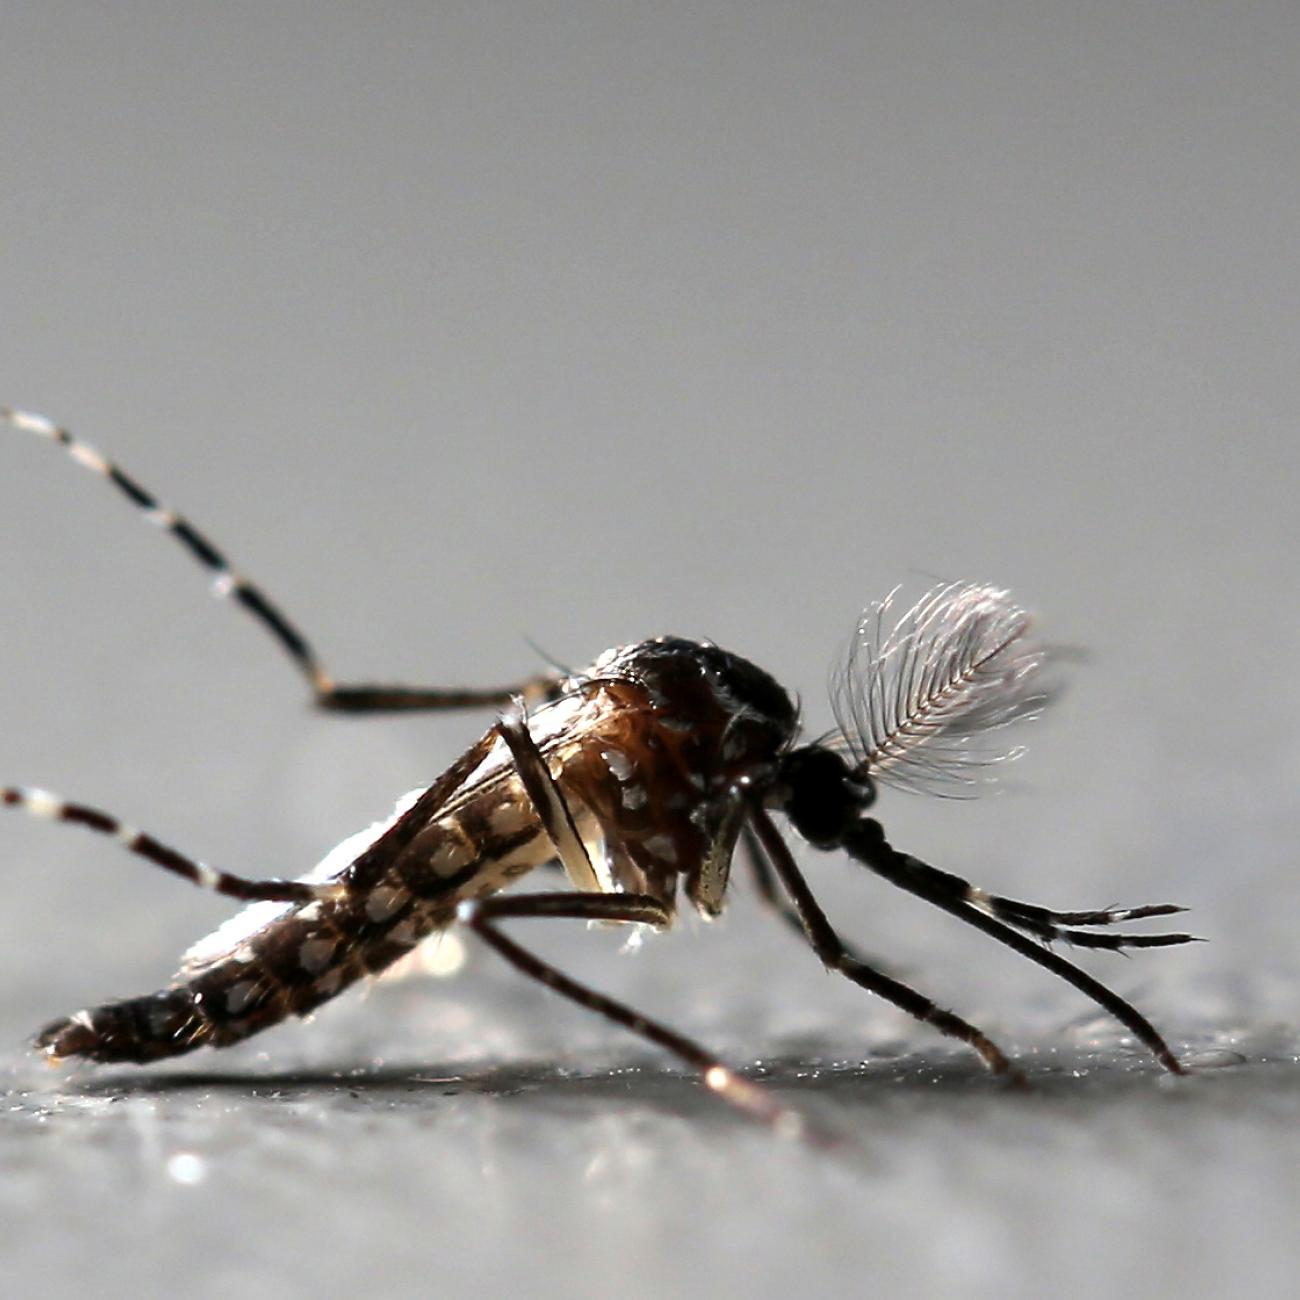 Genetically modified male Aedes aegypti mosquito